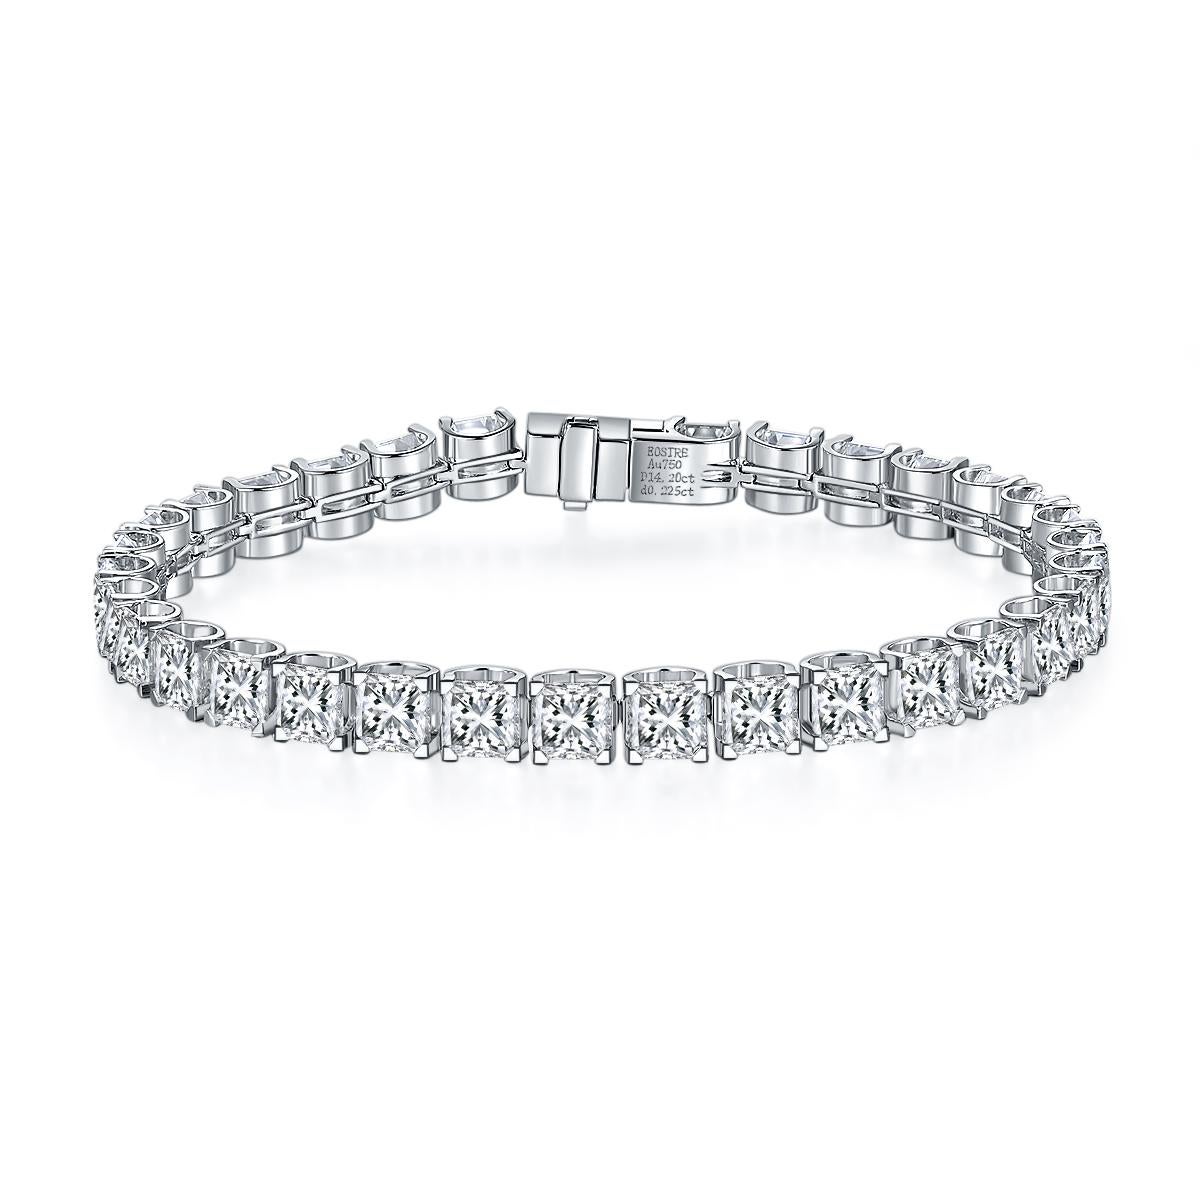 This breathtaking diamond statement tennis bracelet is newly crafted in solid 18k white gold and set with 32 fine quality and large Asscher cut diamonds. The diamonds are mounted in solid and sturdy, squared 4-prong baskets with the most comfortable